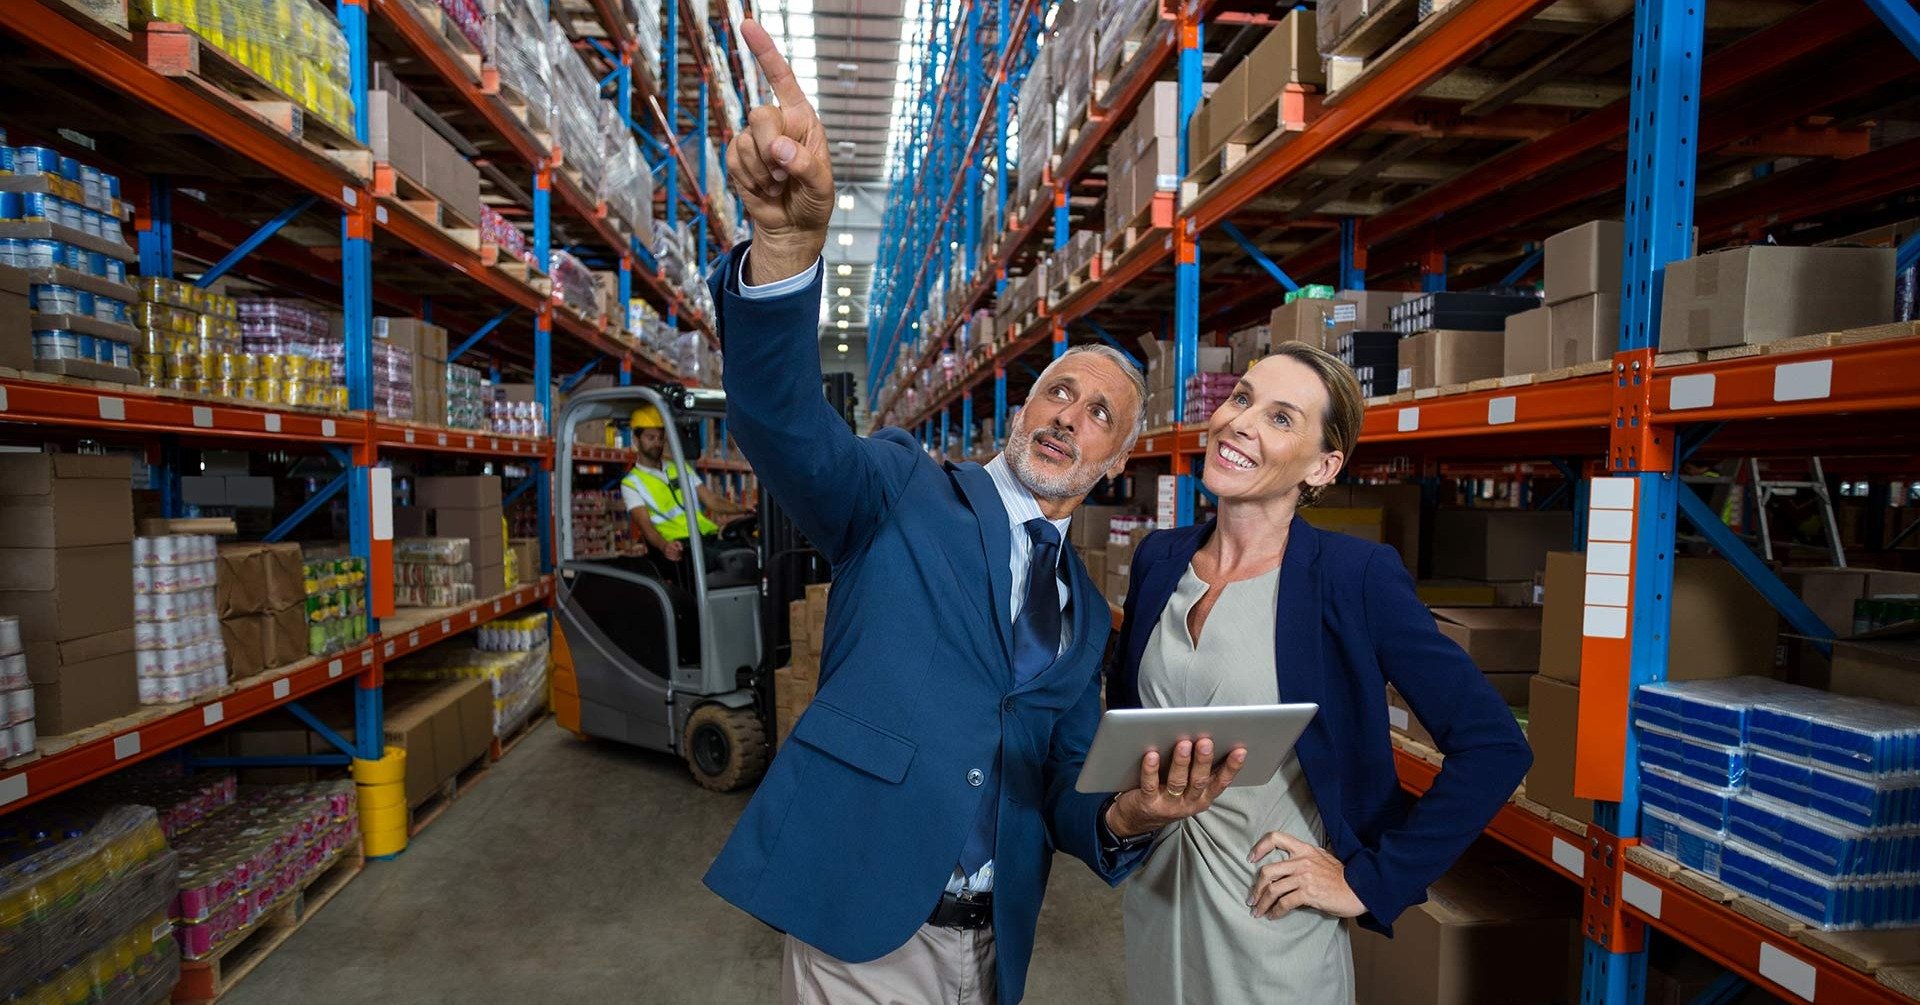 Trends and insights into warehouse and distribution